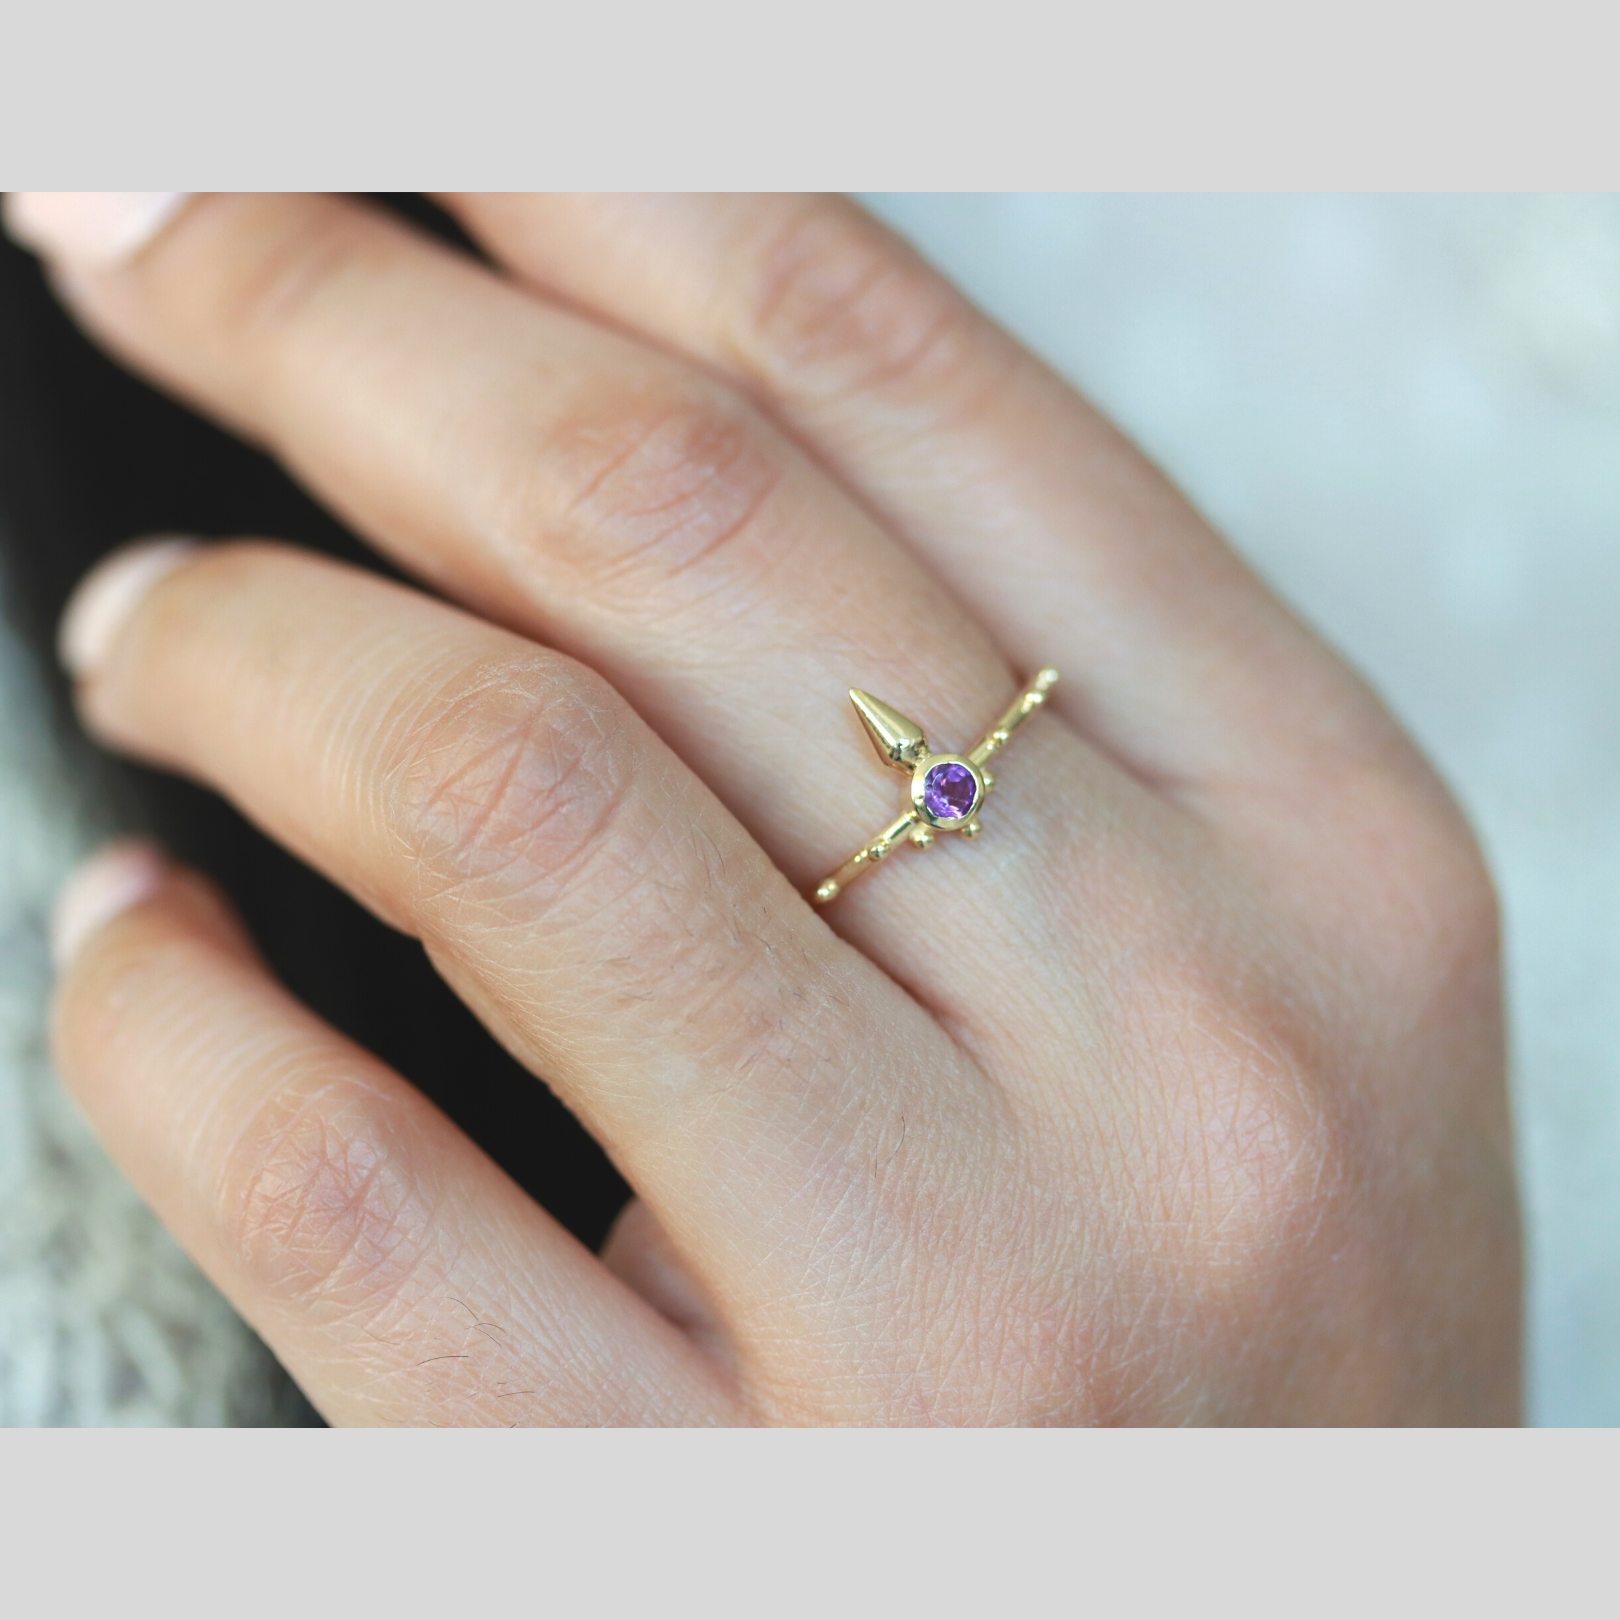 Solid 14k gold temple tower ring in amethyst